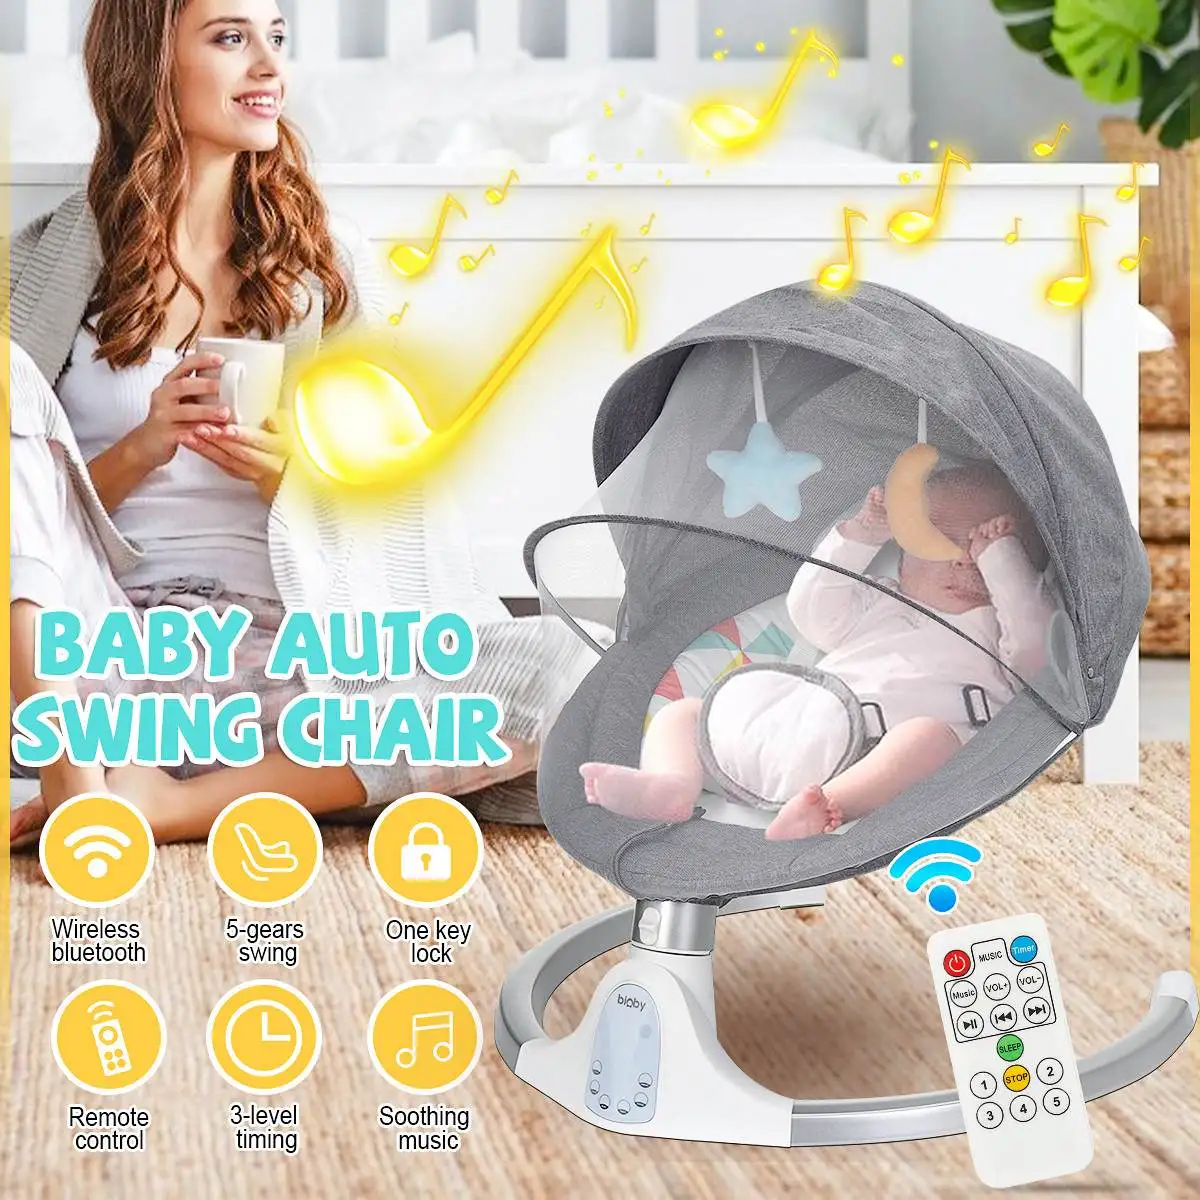 BIOBY Baby Swing for Infants Motorized Portable Swing Bouncer Chair Rocker Soothing Music Sleeping Speaker with Remote Control